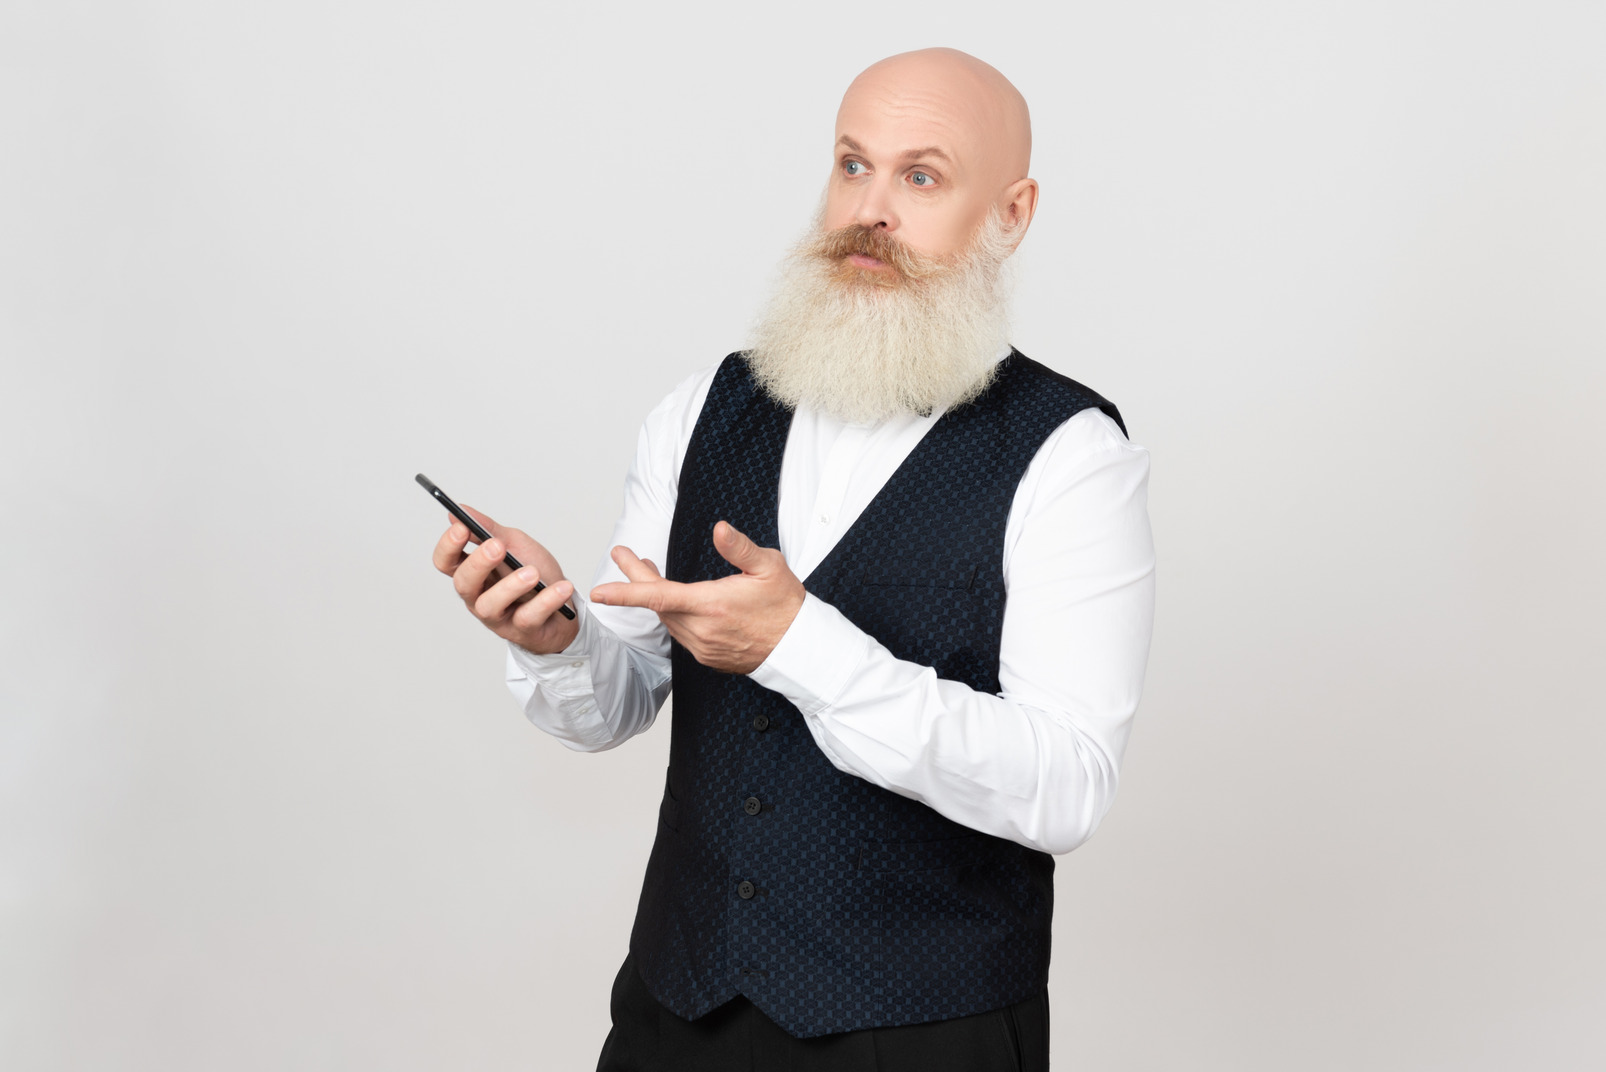 Aged man holding phone and looking little surprised